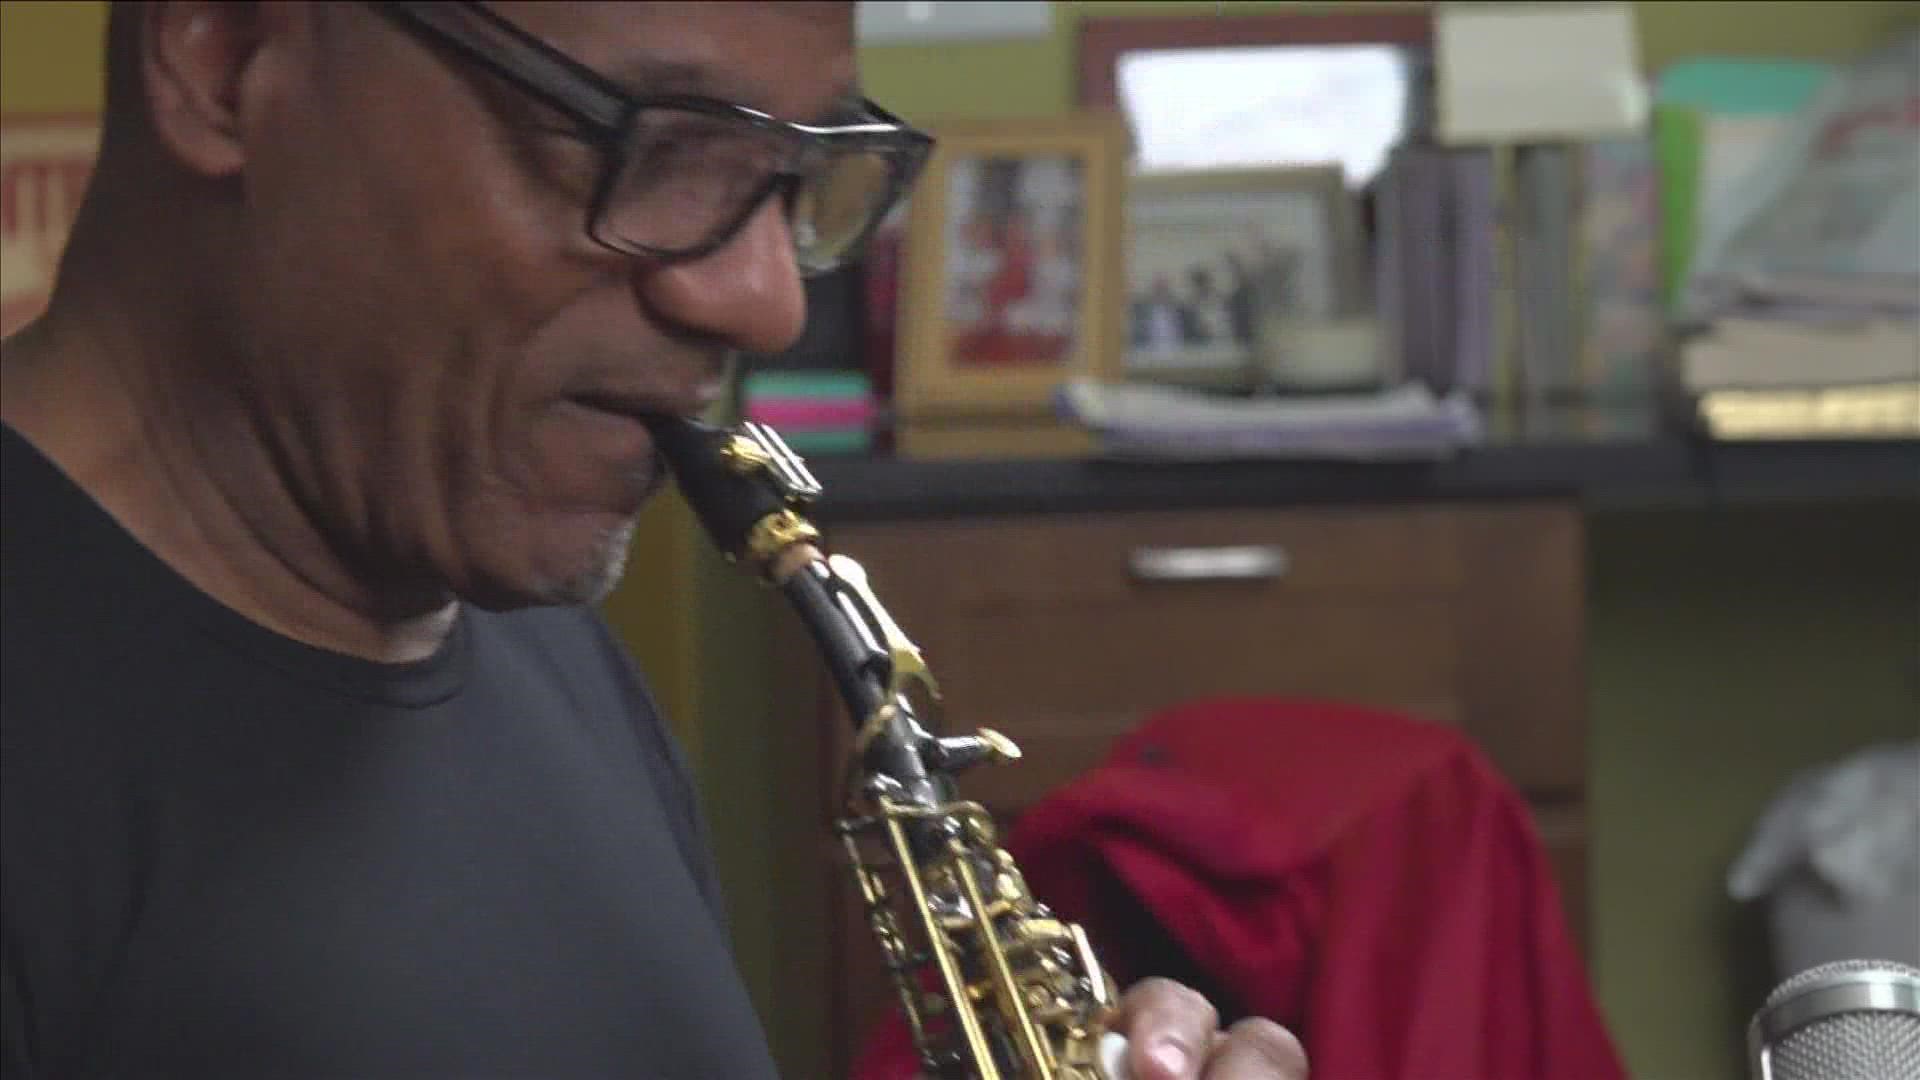 "People who just want to learn how to play the saxophone can have this place, The Sax Loft. Our motto is ‘Let's hang,’” said Grammy winning saxophonist Kirk Whalum.